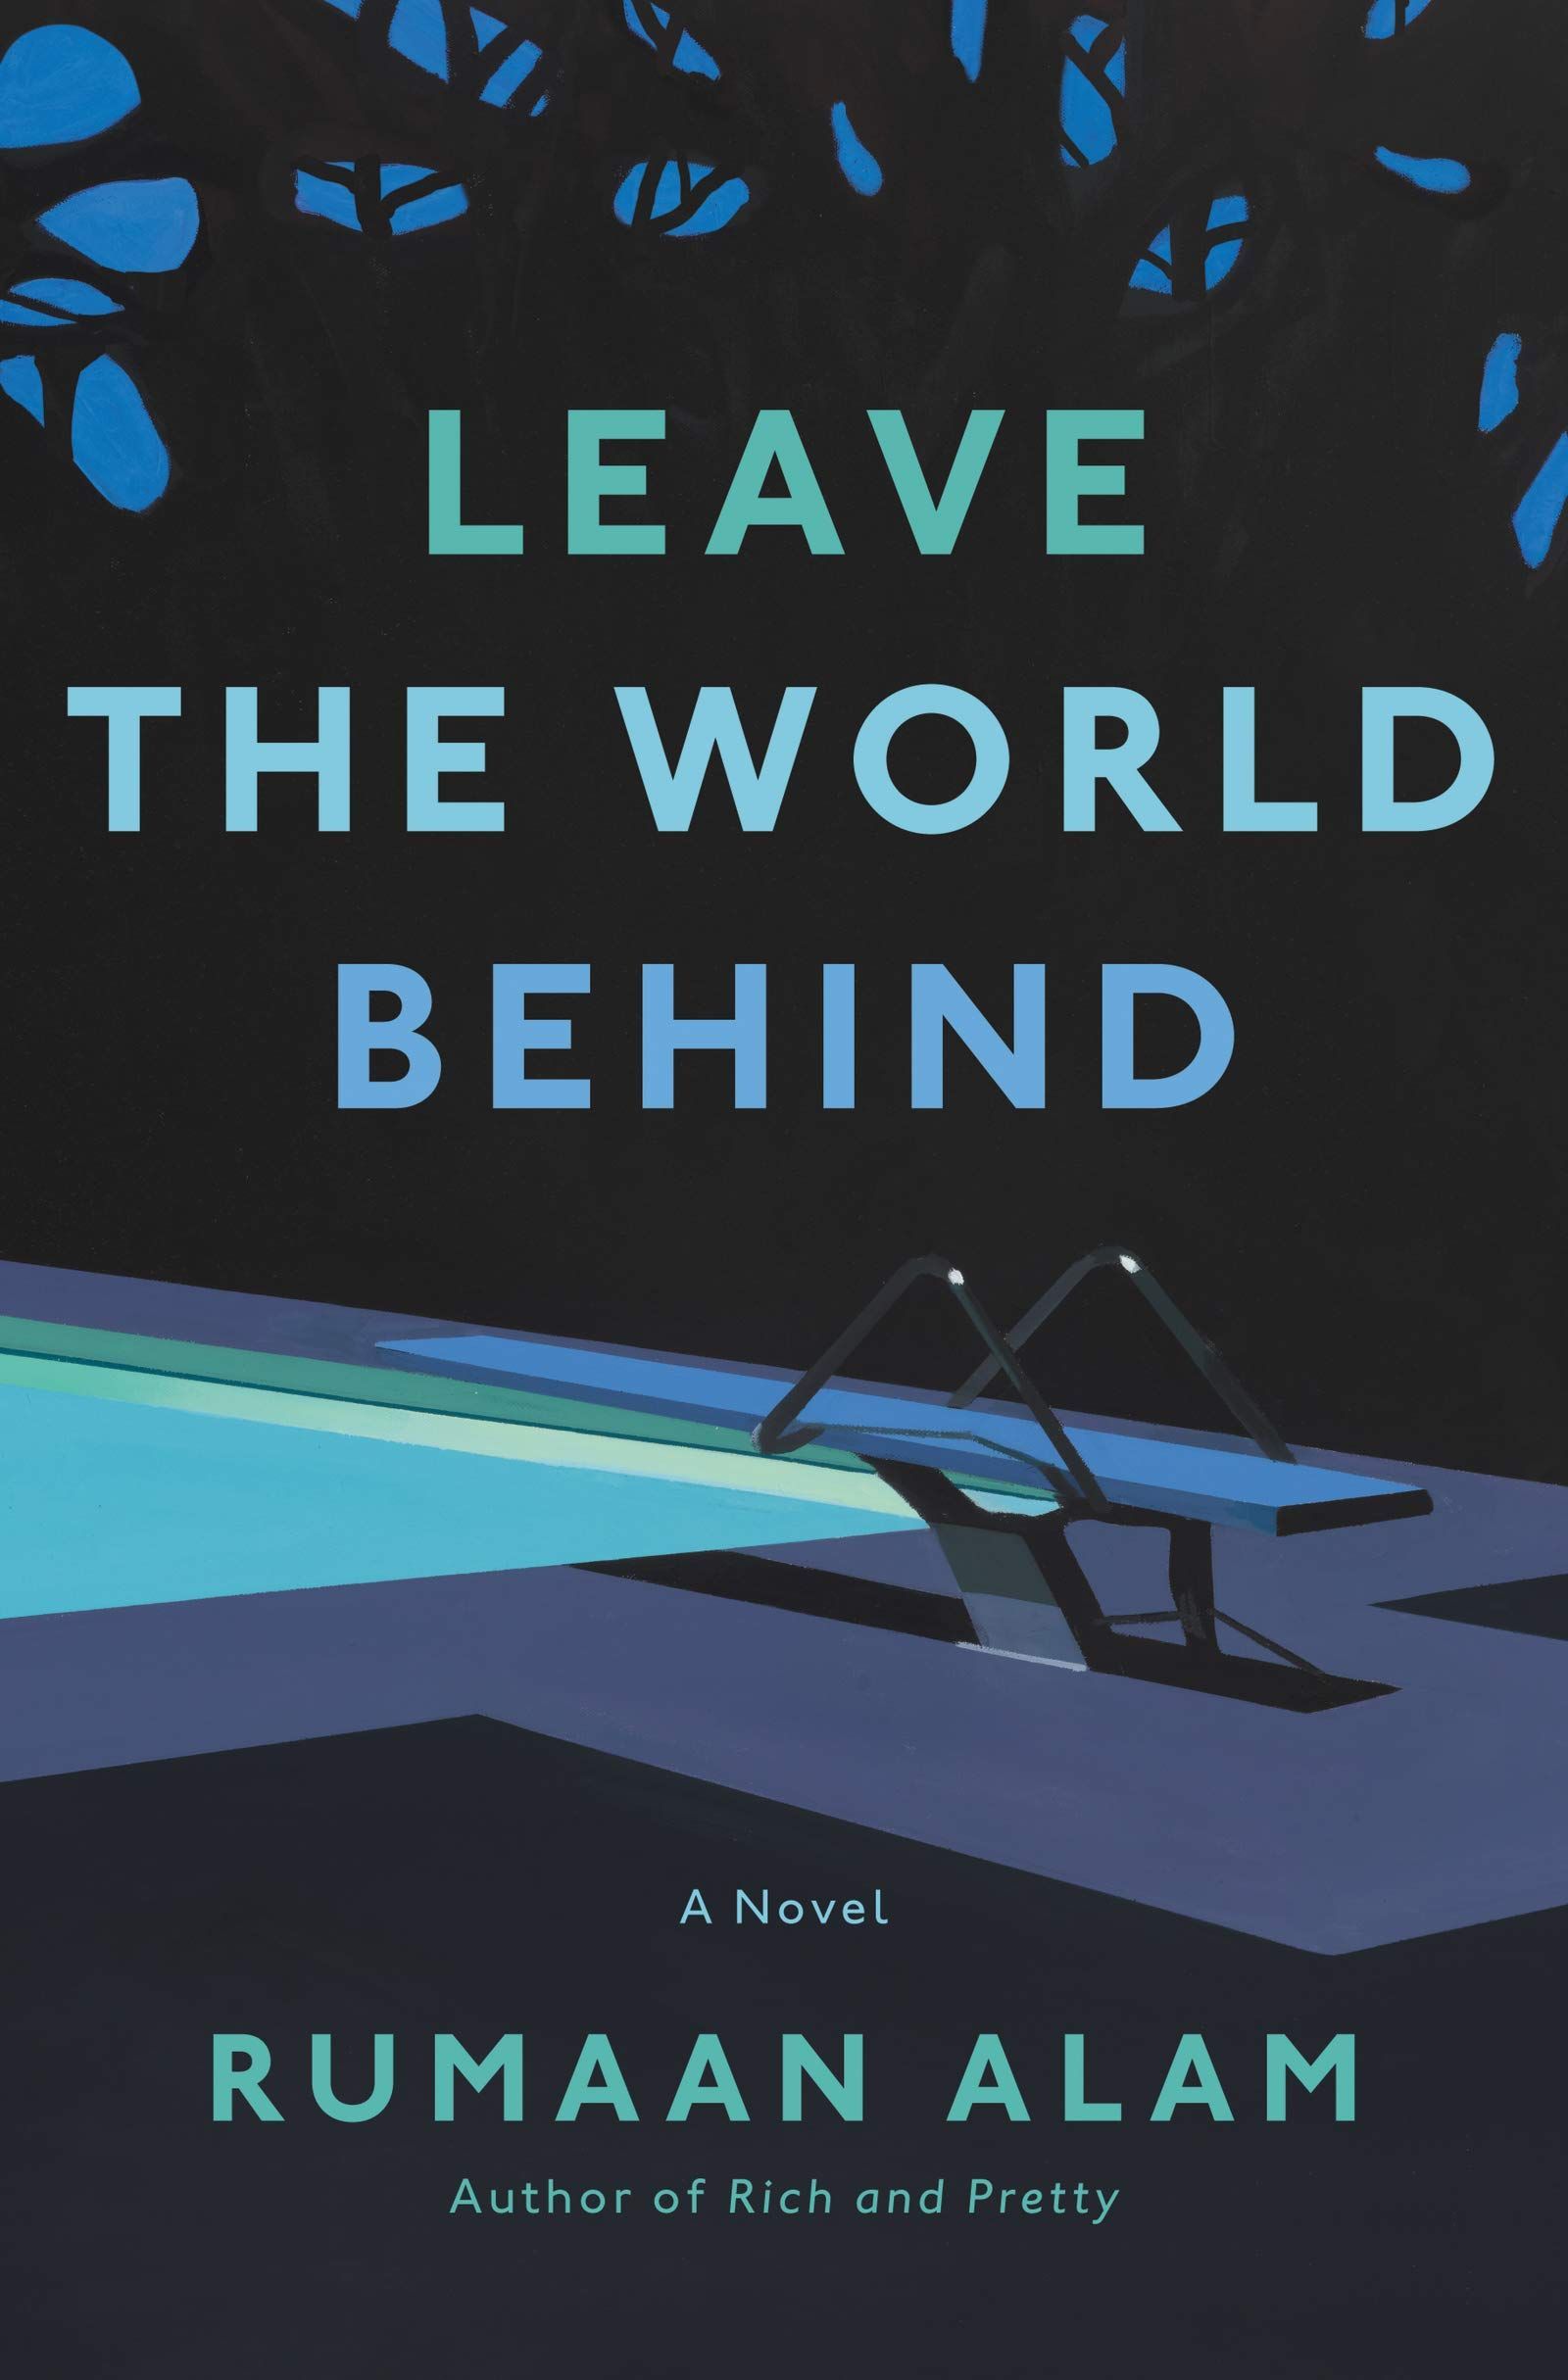 Rumaan Alam’s “Leave the World Behind” Examines What Happens When You Can’t